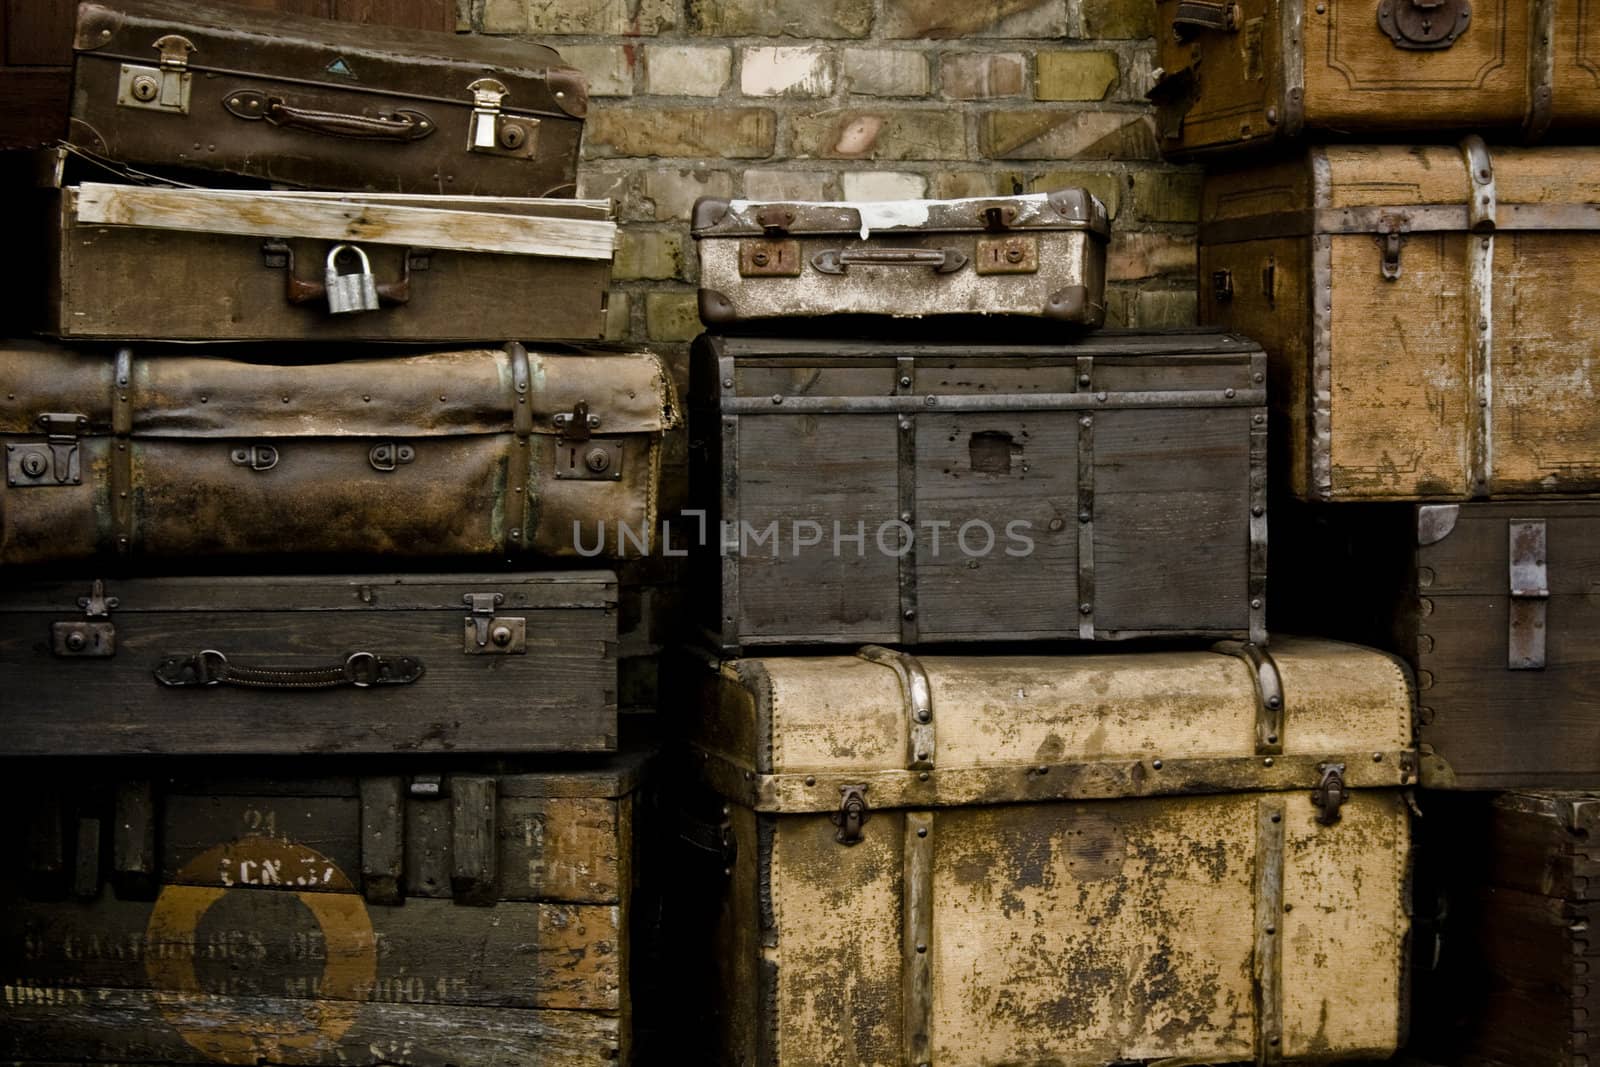 old baggage